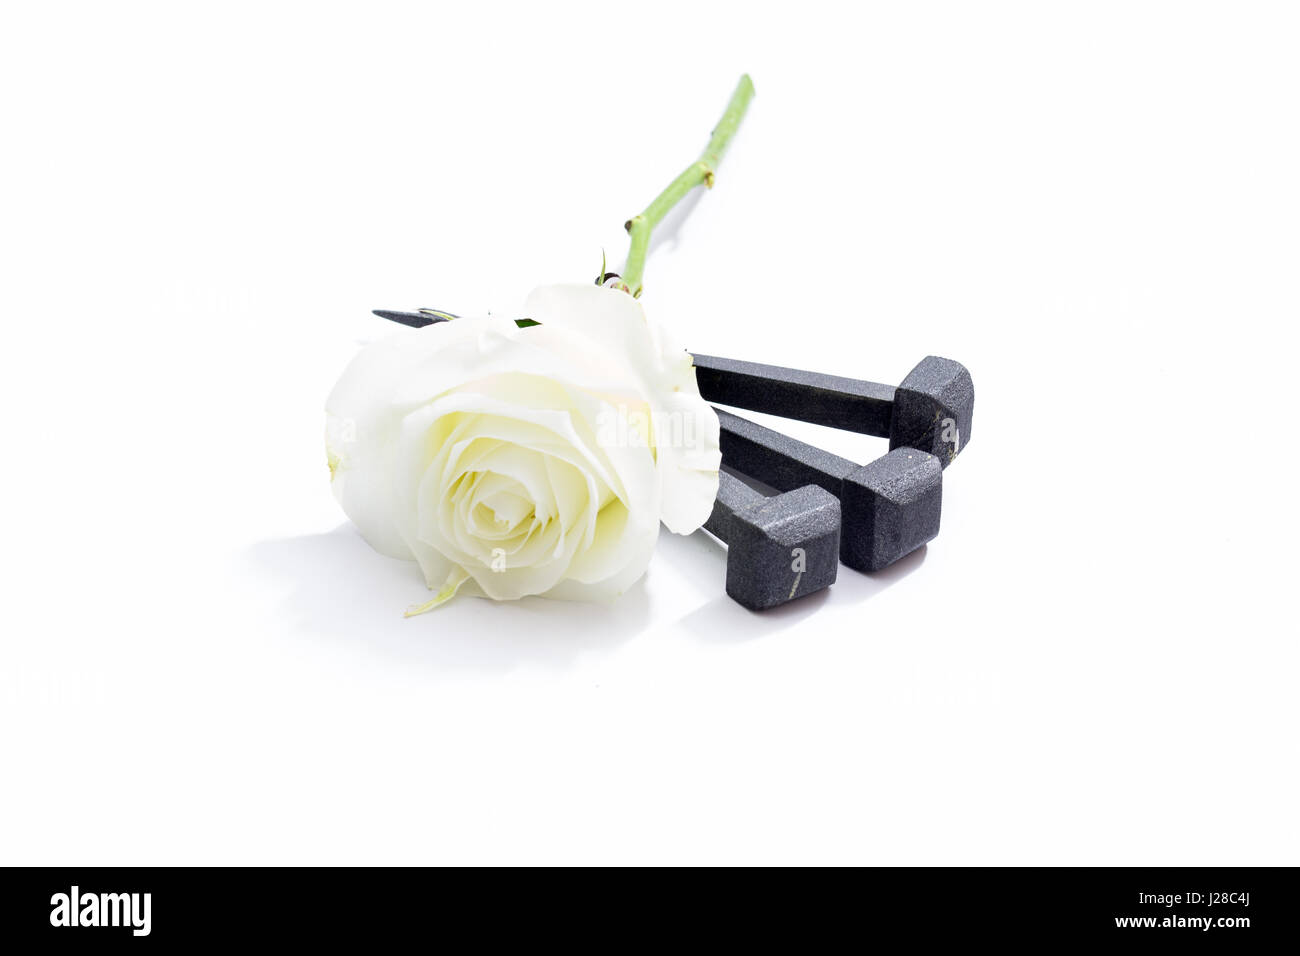 Jesus Christ nails from the Crucifixion and white rose on a white background. Stock Photo